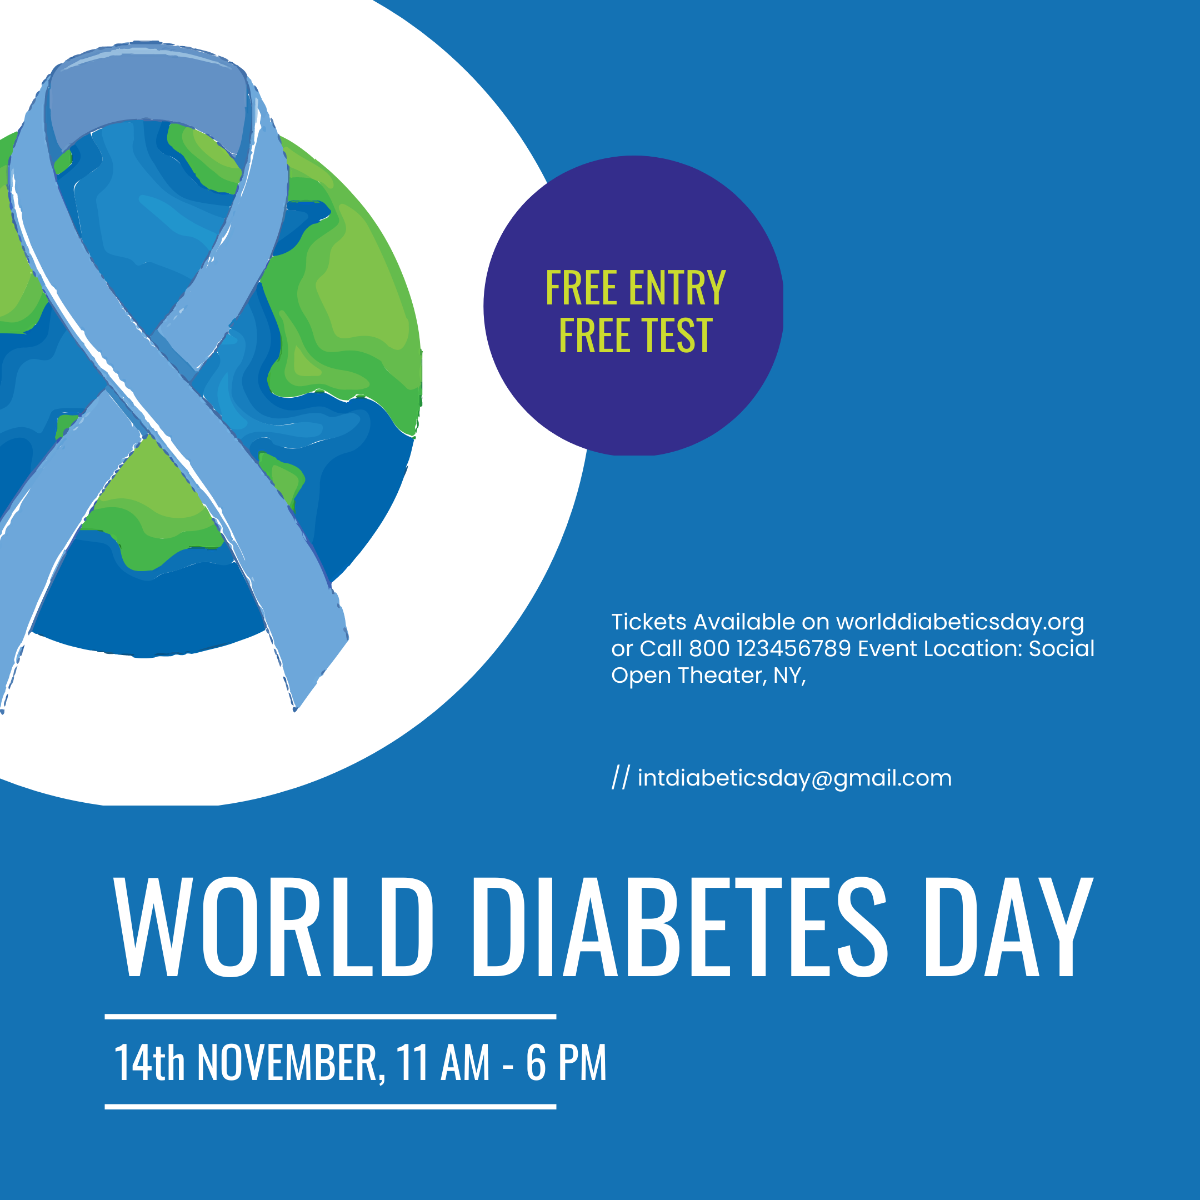 Free World Diabetes Day Instagram Post Template